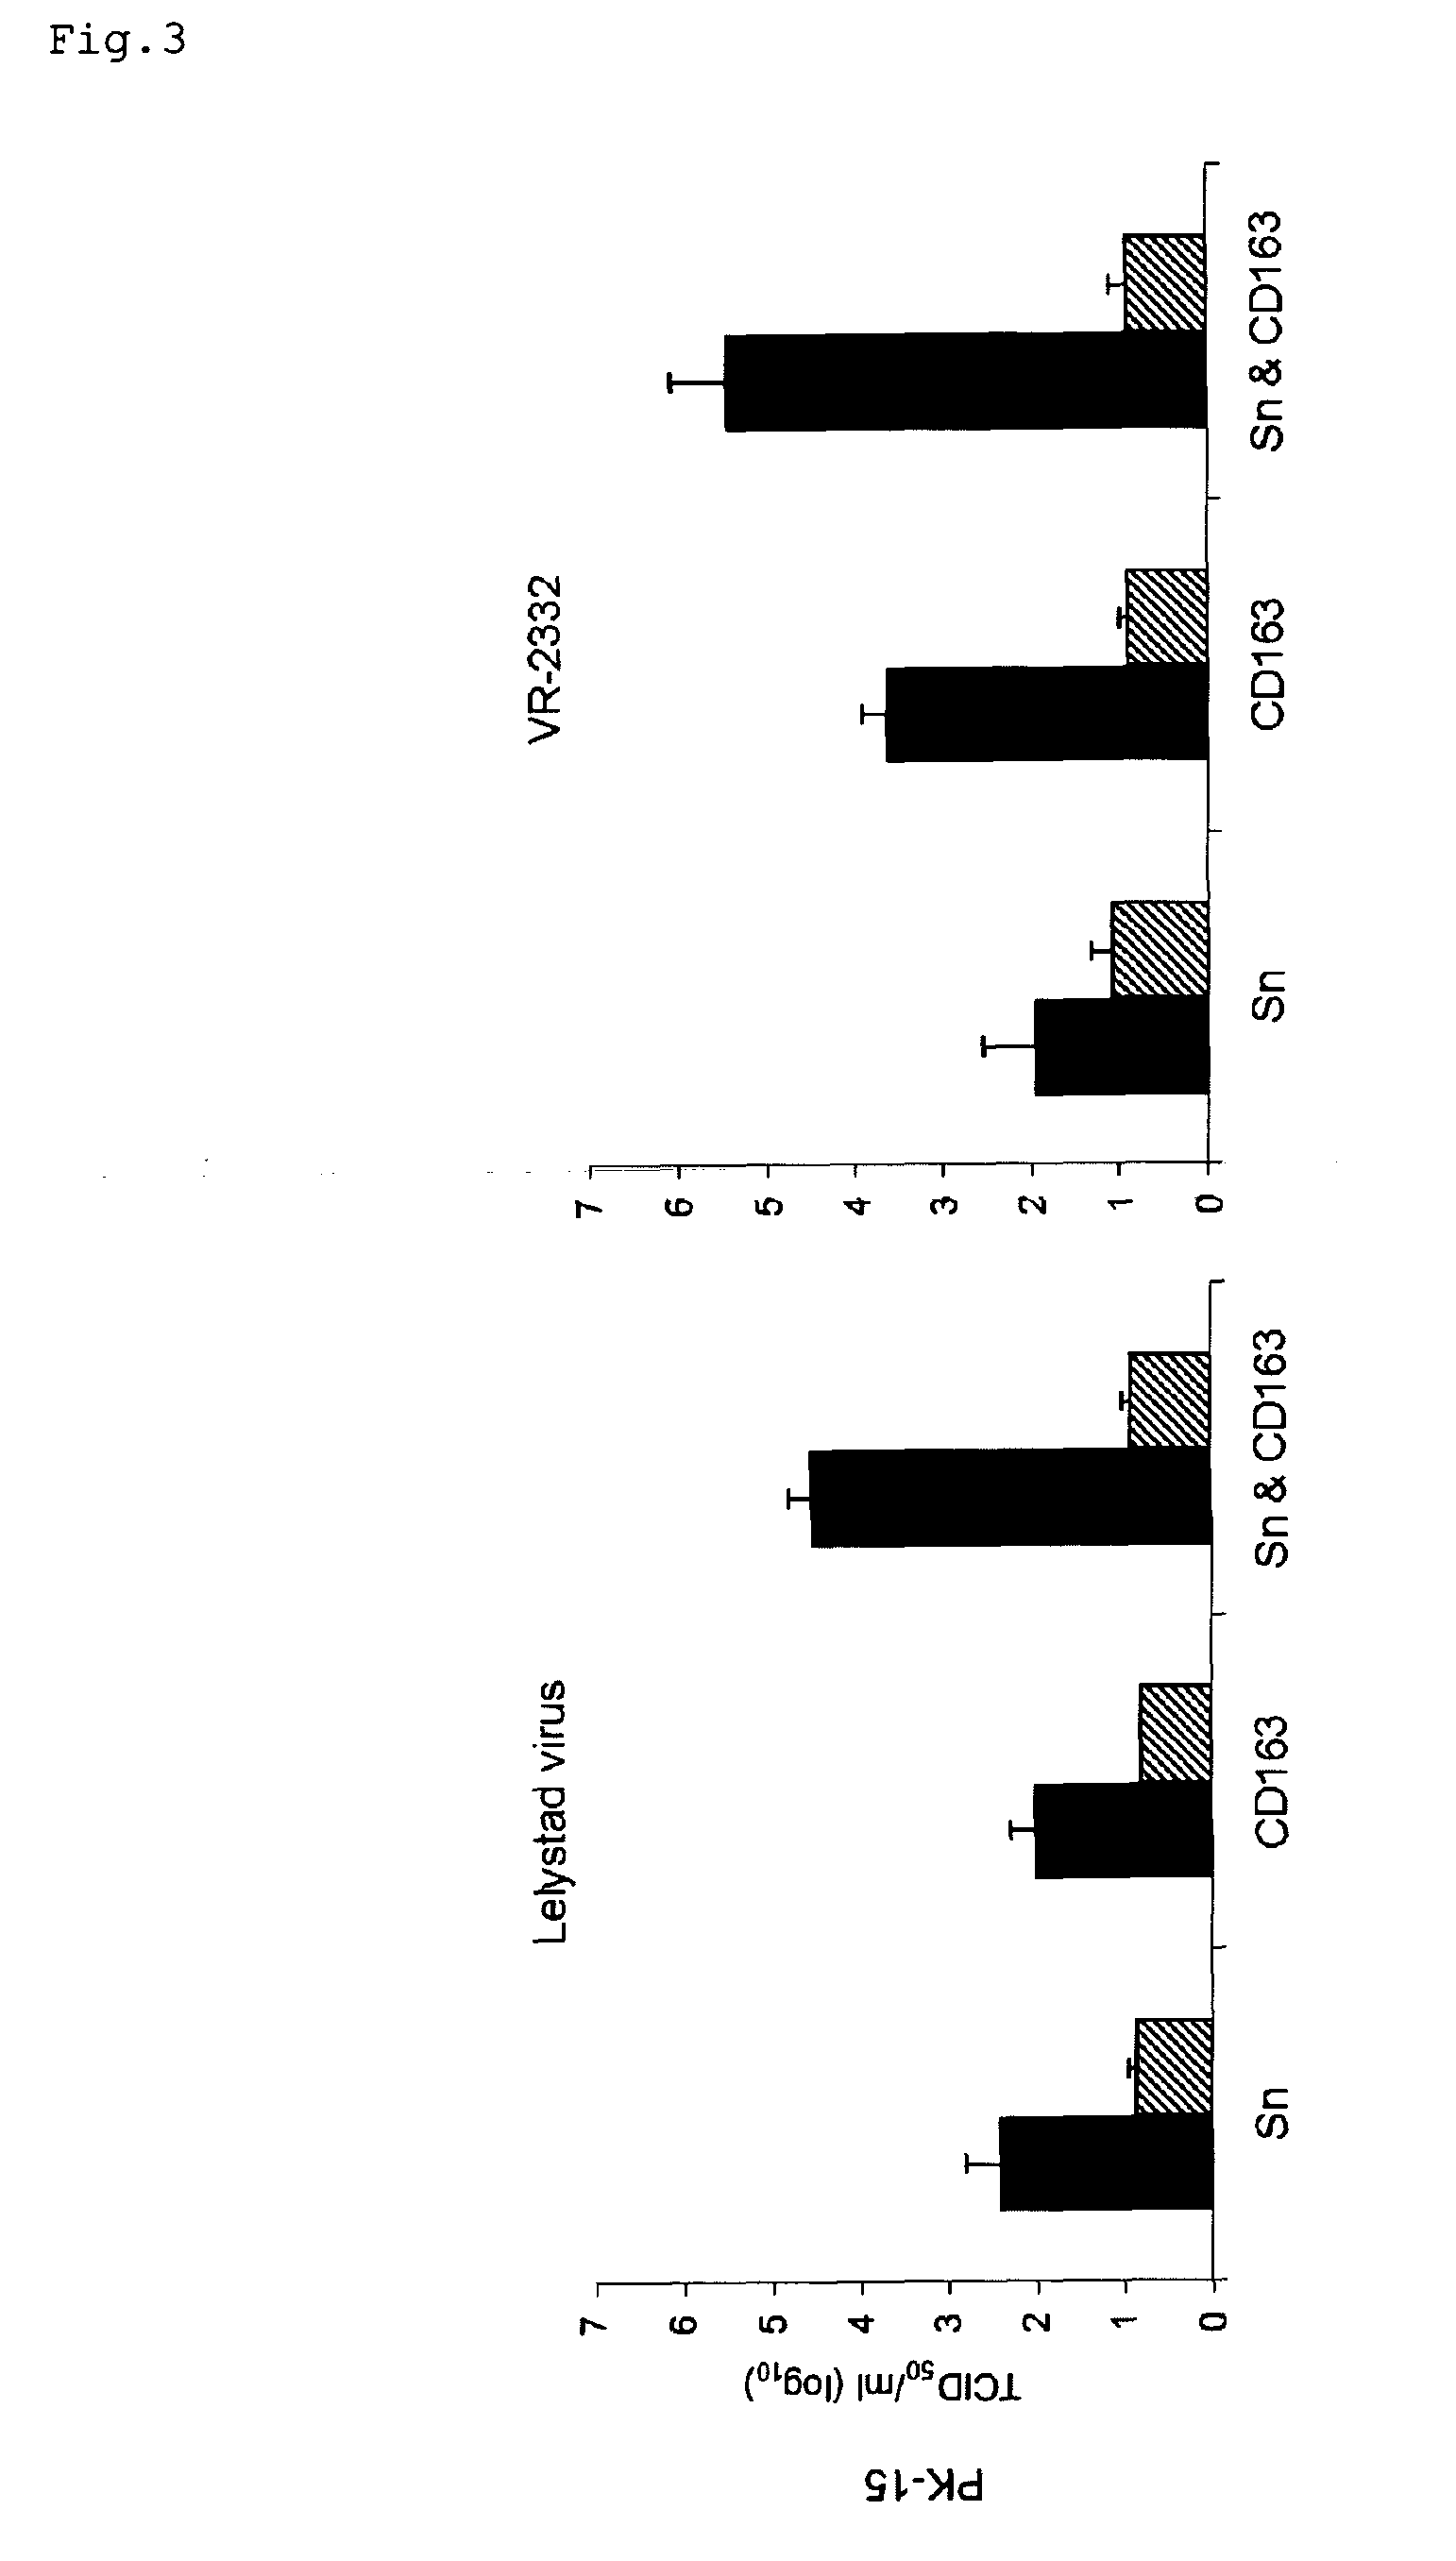 Permissive cells and uses thereof